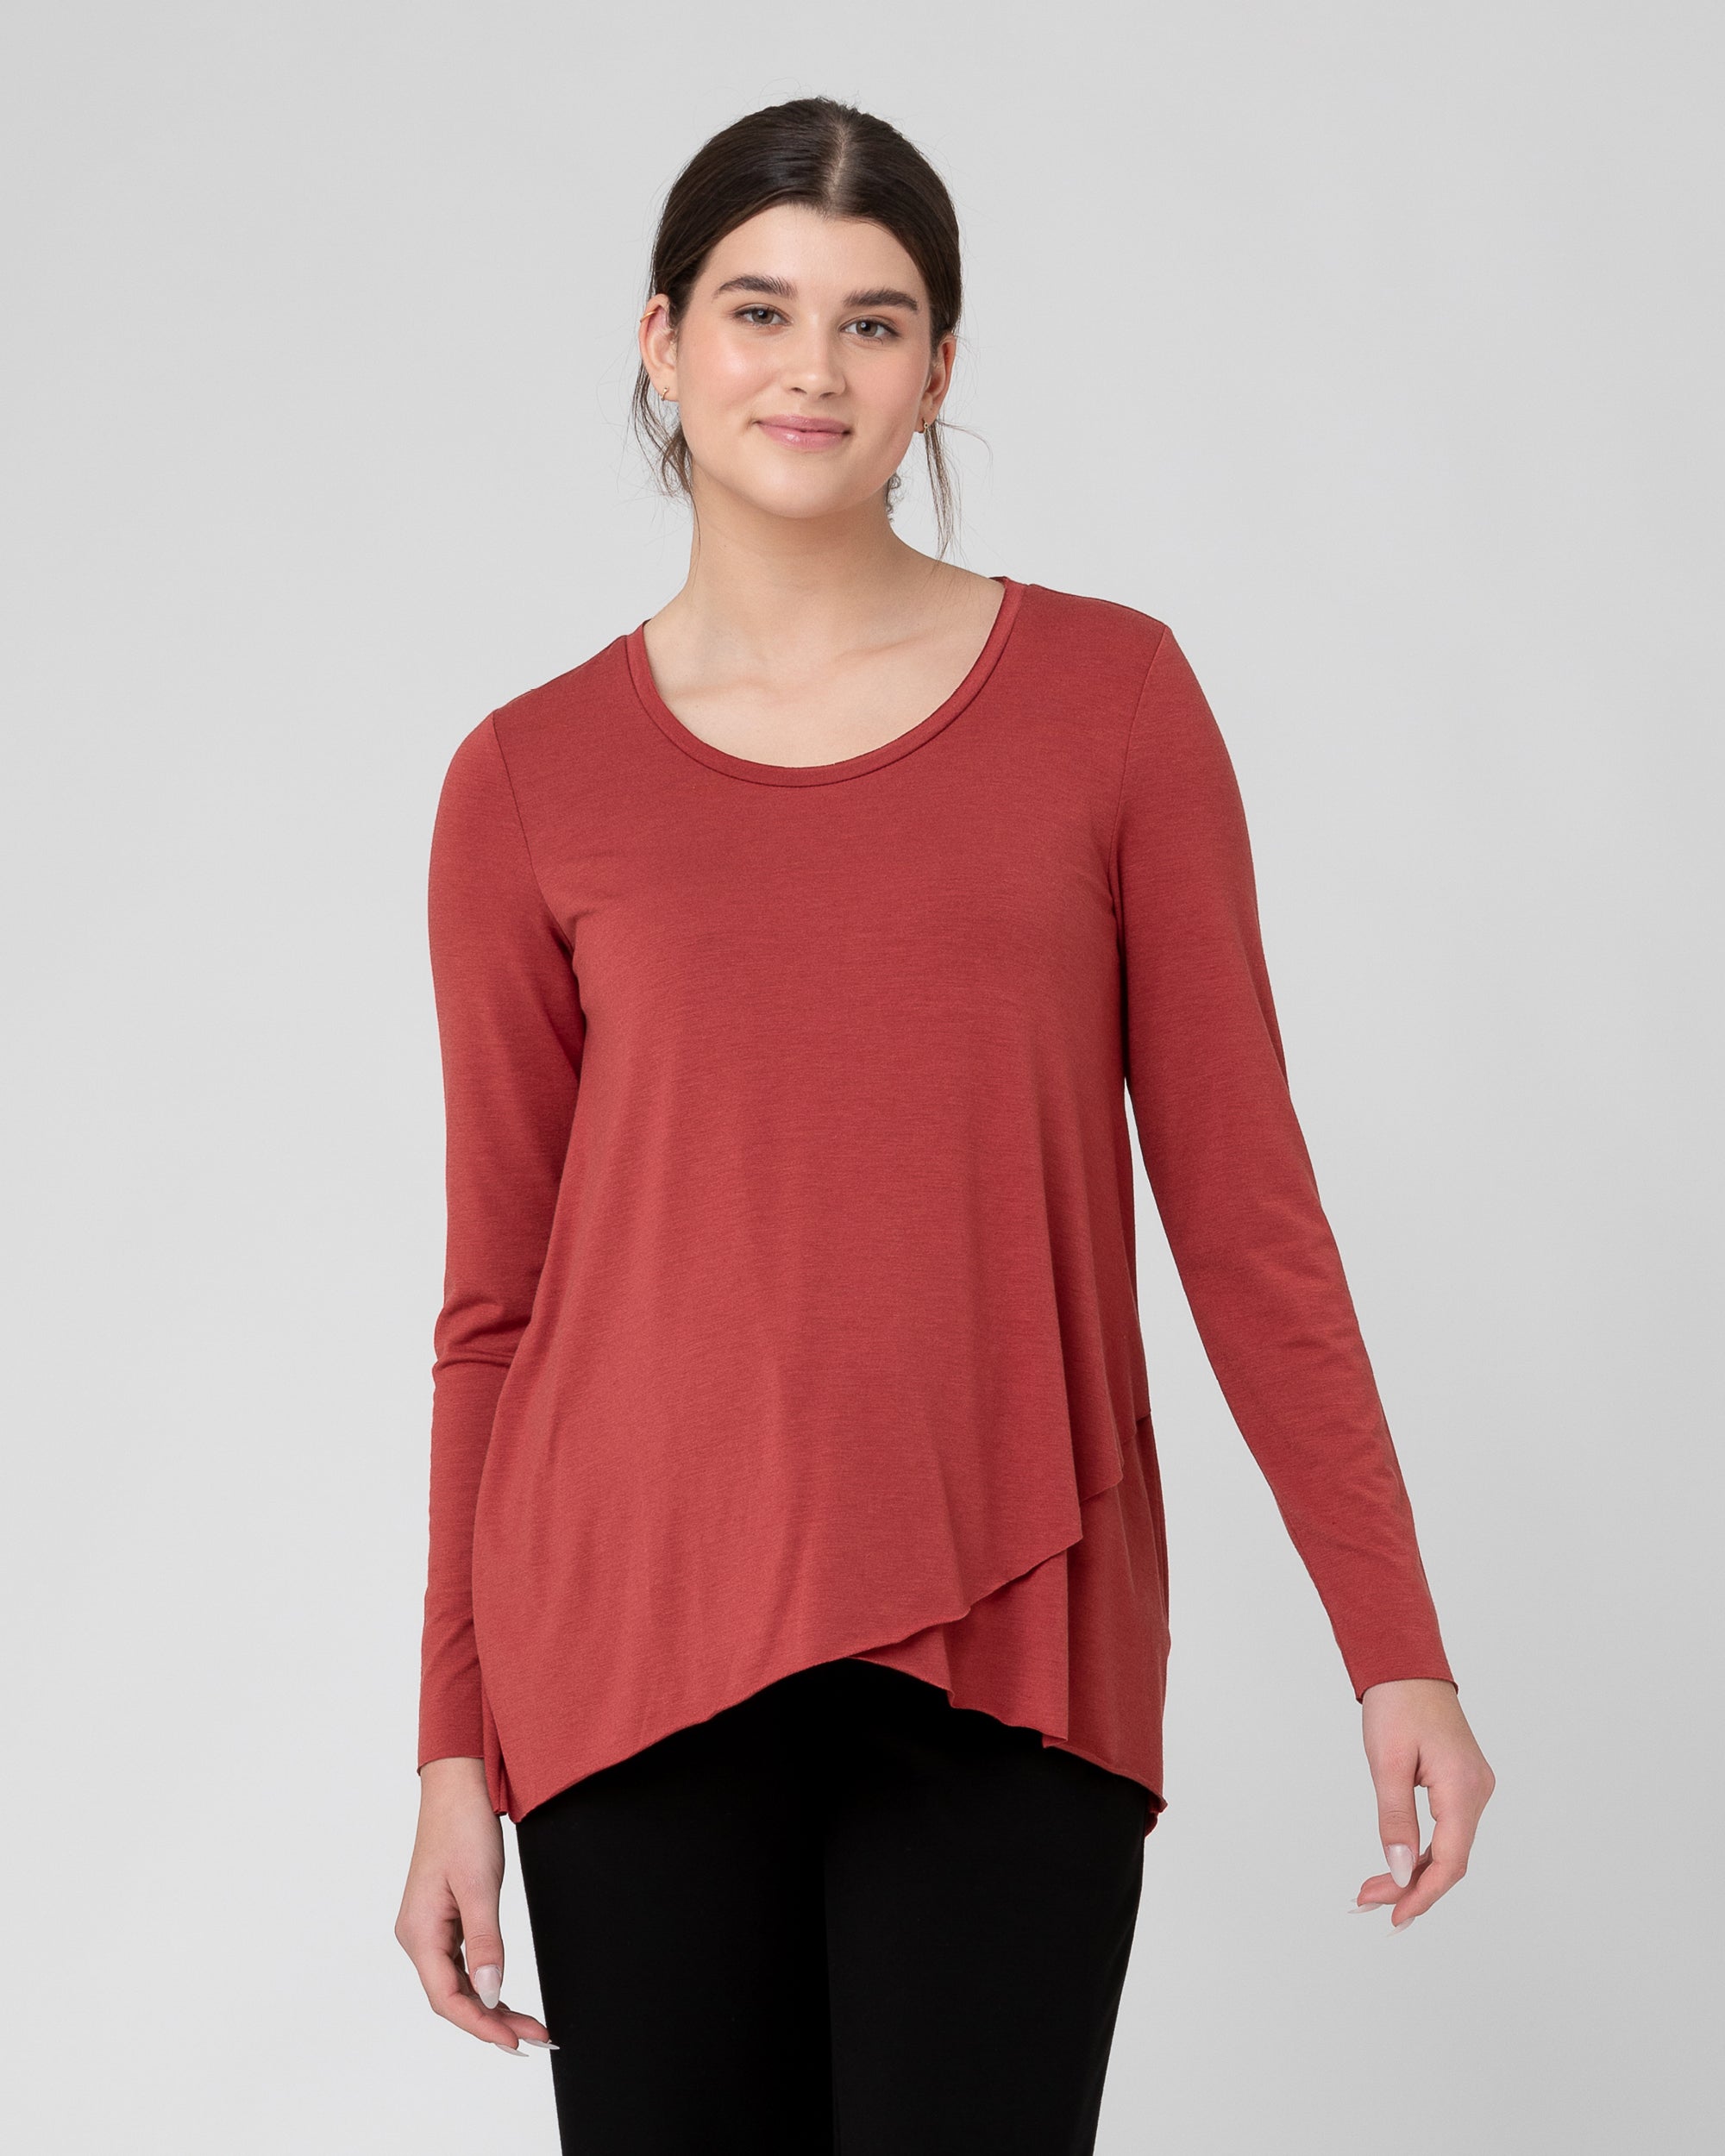 Maternity Tops - Stylish & Comfortable Maternity Tops Australia Wide – Page  4